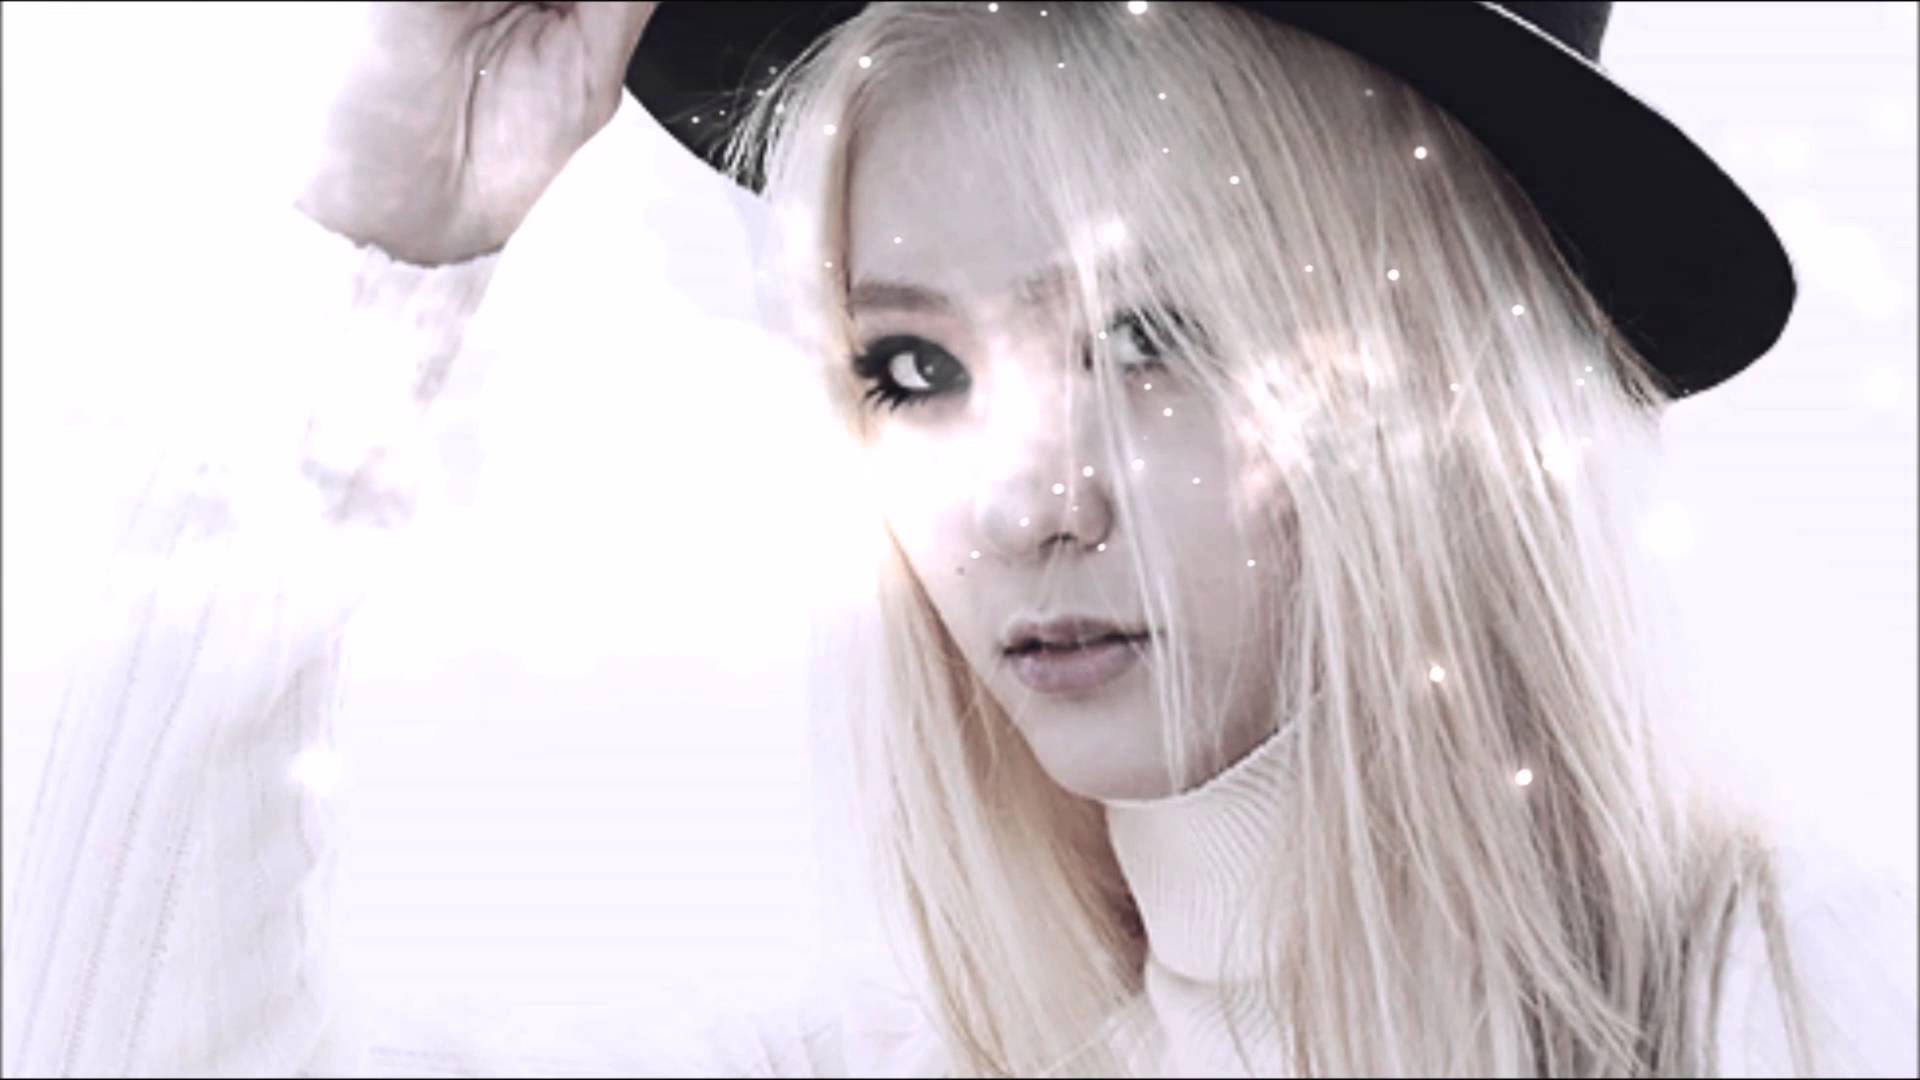 krystal jung - the girl of the moon